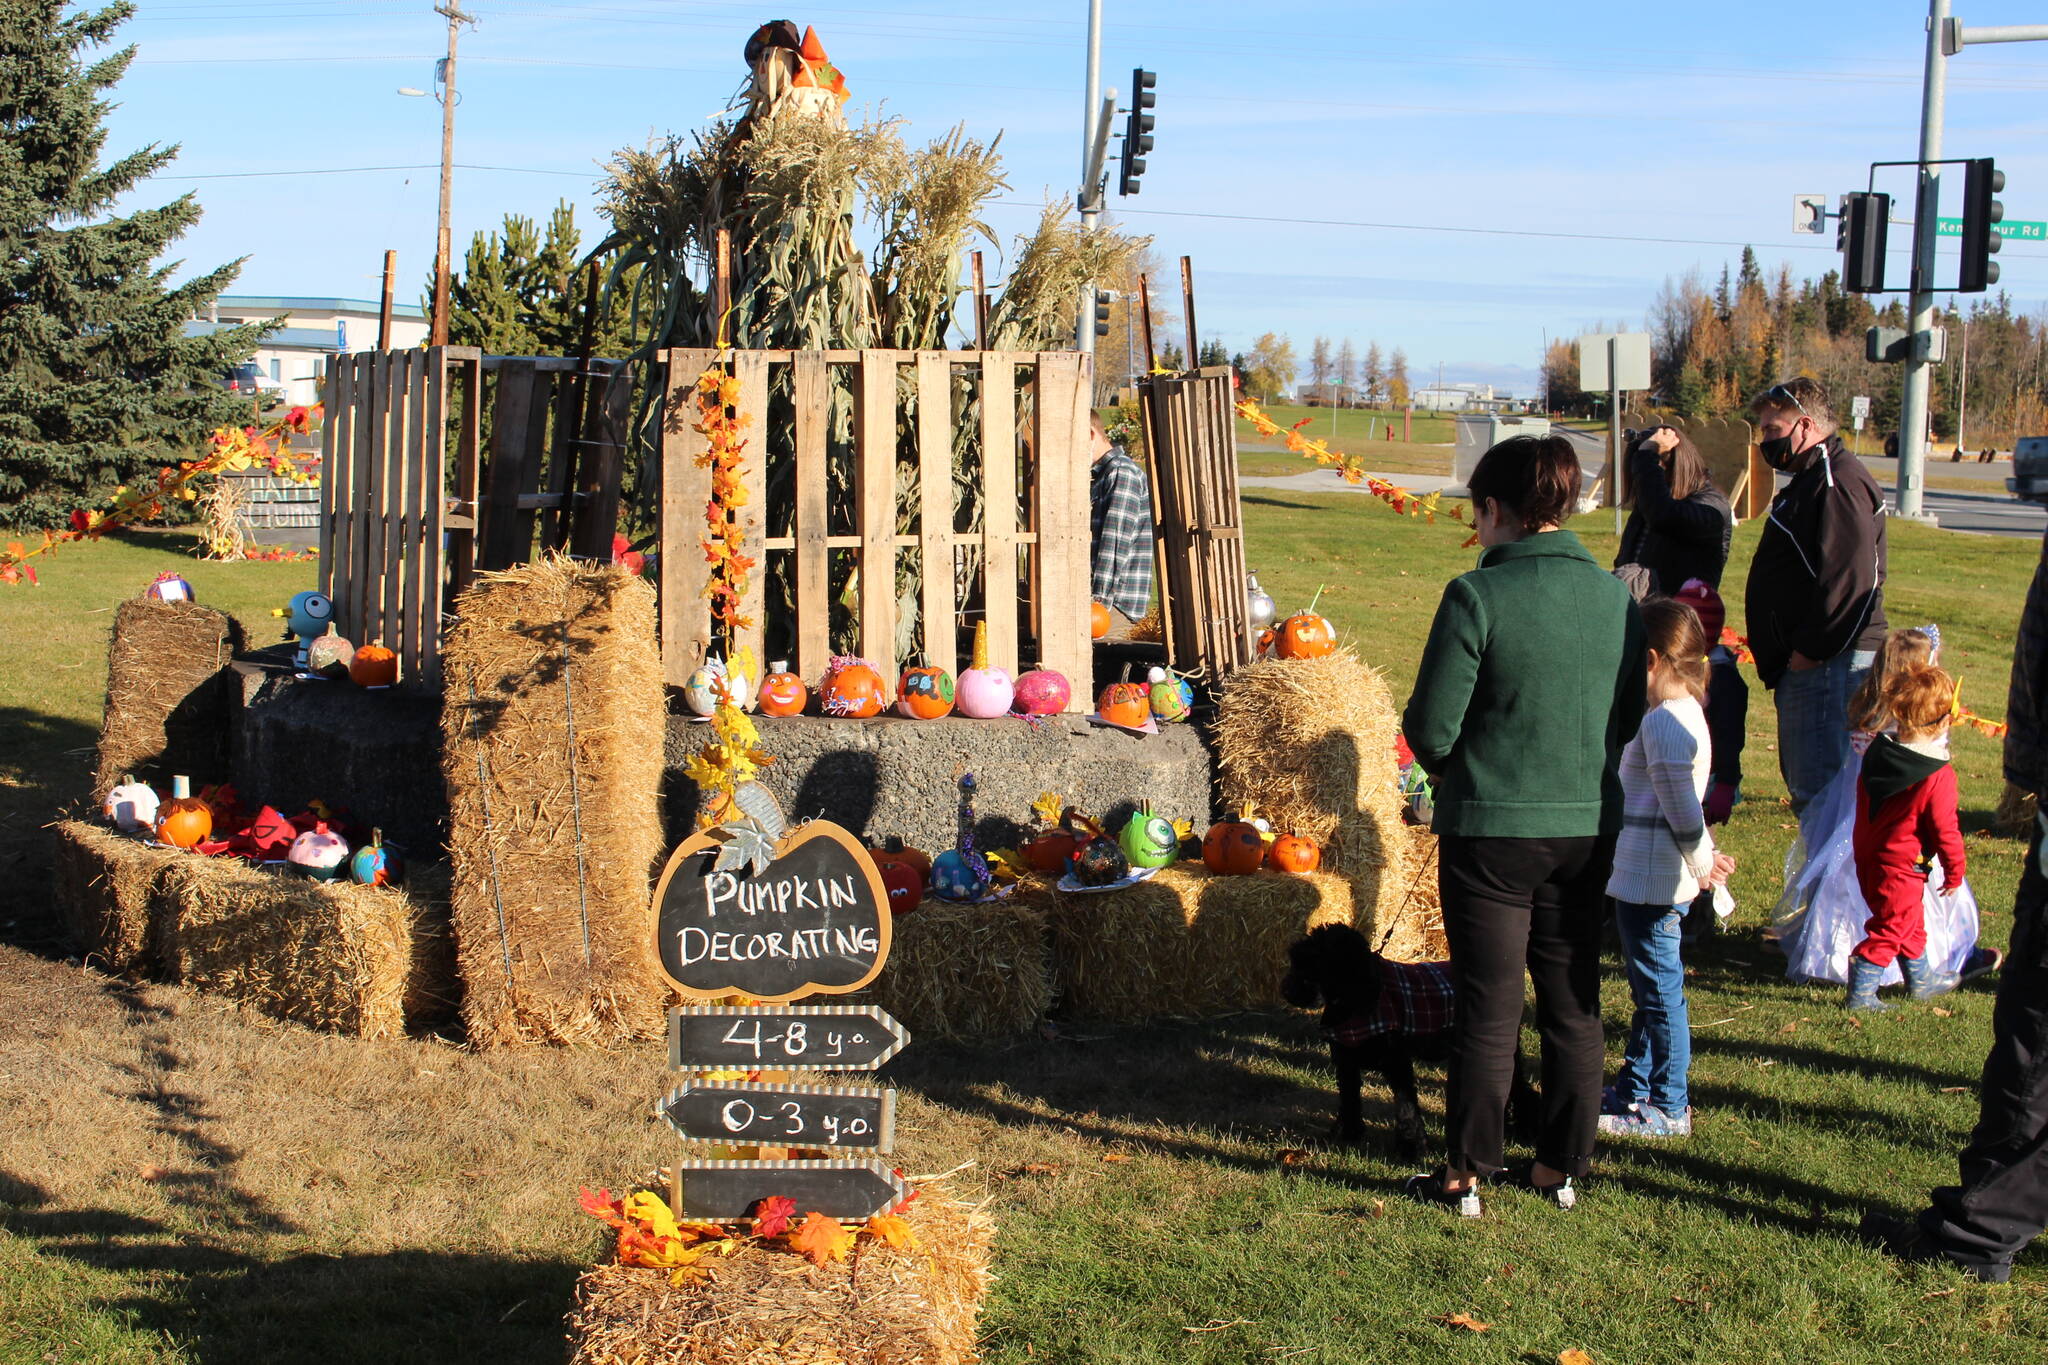 Pumpkins submitted to the pumpkin decorating contest are seen at the 5th annual Kenai Fall Pumpkin Festival in Kenai, Alaska, on Oct. 10, 2020. (Photo by Brian Mazurek/Peninsula Clarion)